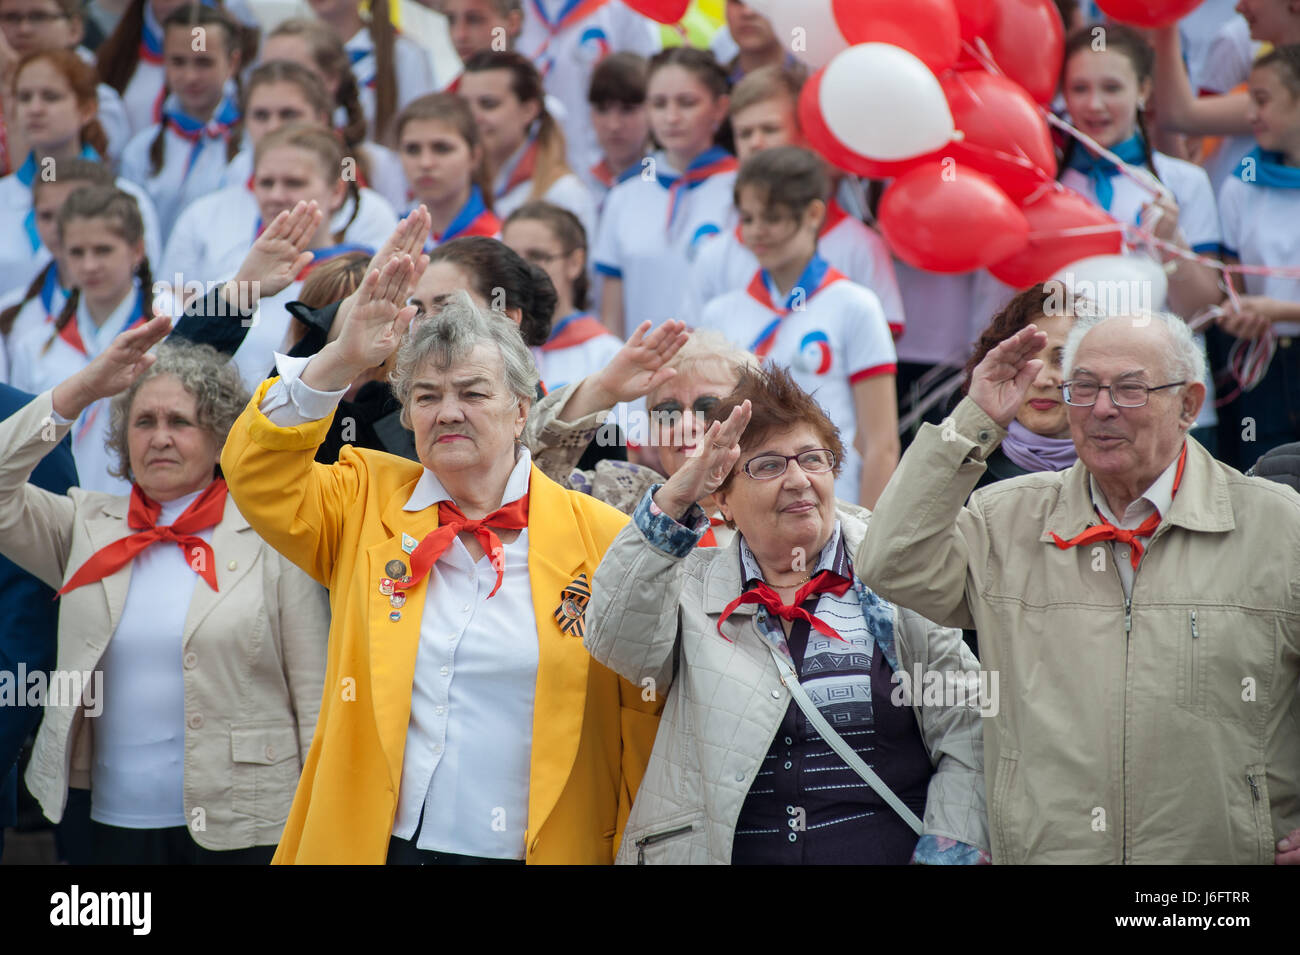 Tambov, Tambov region, Russia. 21st May, 2017. Older people in pioneer ties of the USSR times give pioneer greeting (pioneer salute). In the background of the modern pioneers of Russia - representatives of the ''Russian movement of students' Credit: Aleksei Sukhorukov/ZUMA Wire/Alamy Live News Stock Photo